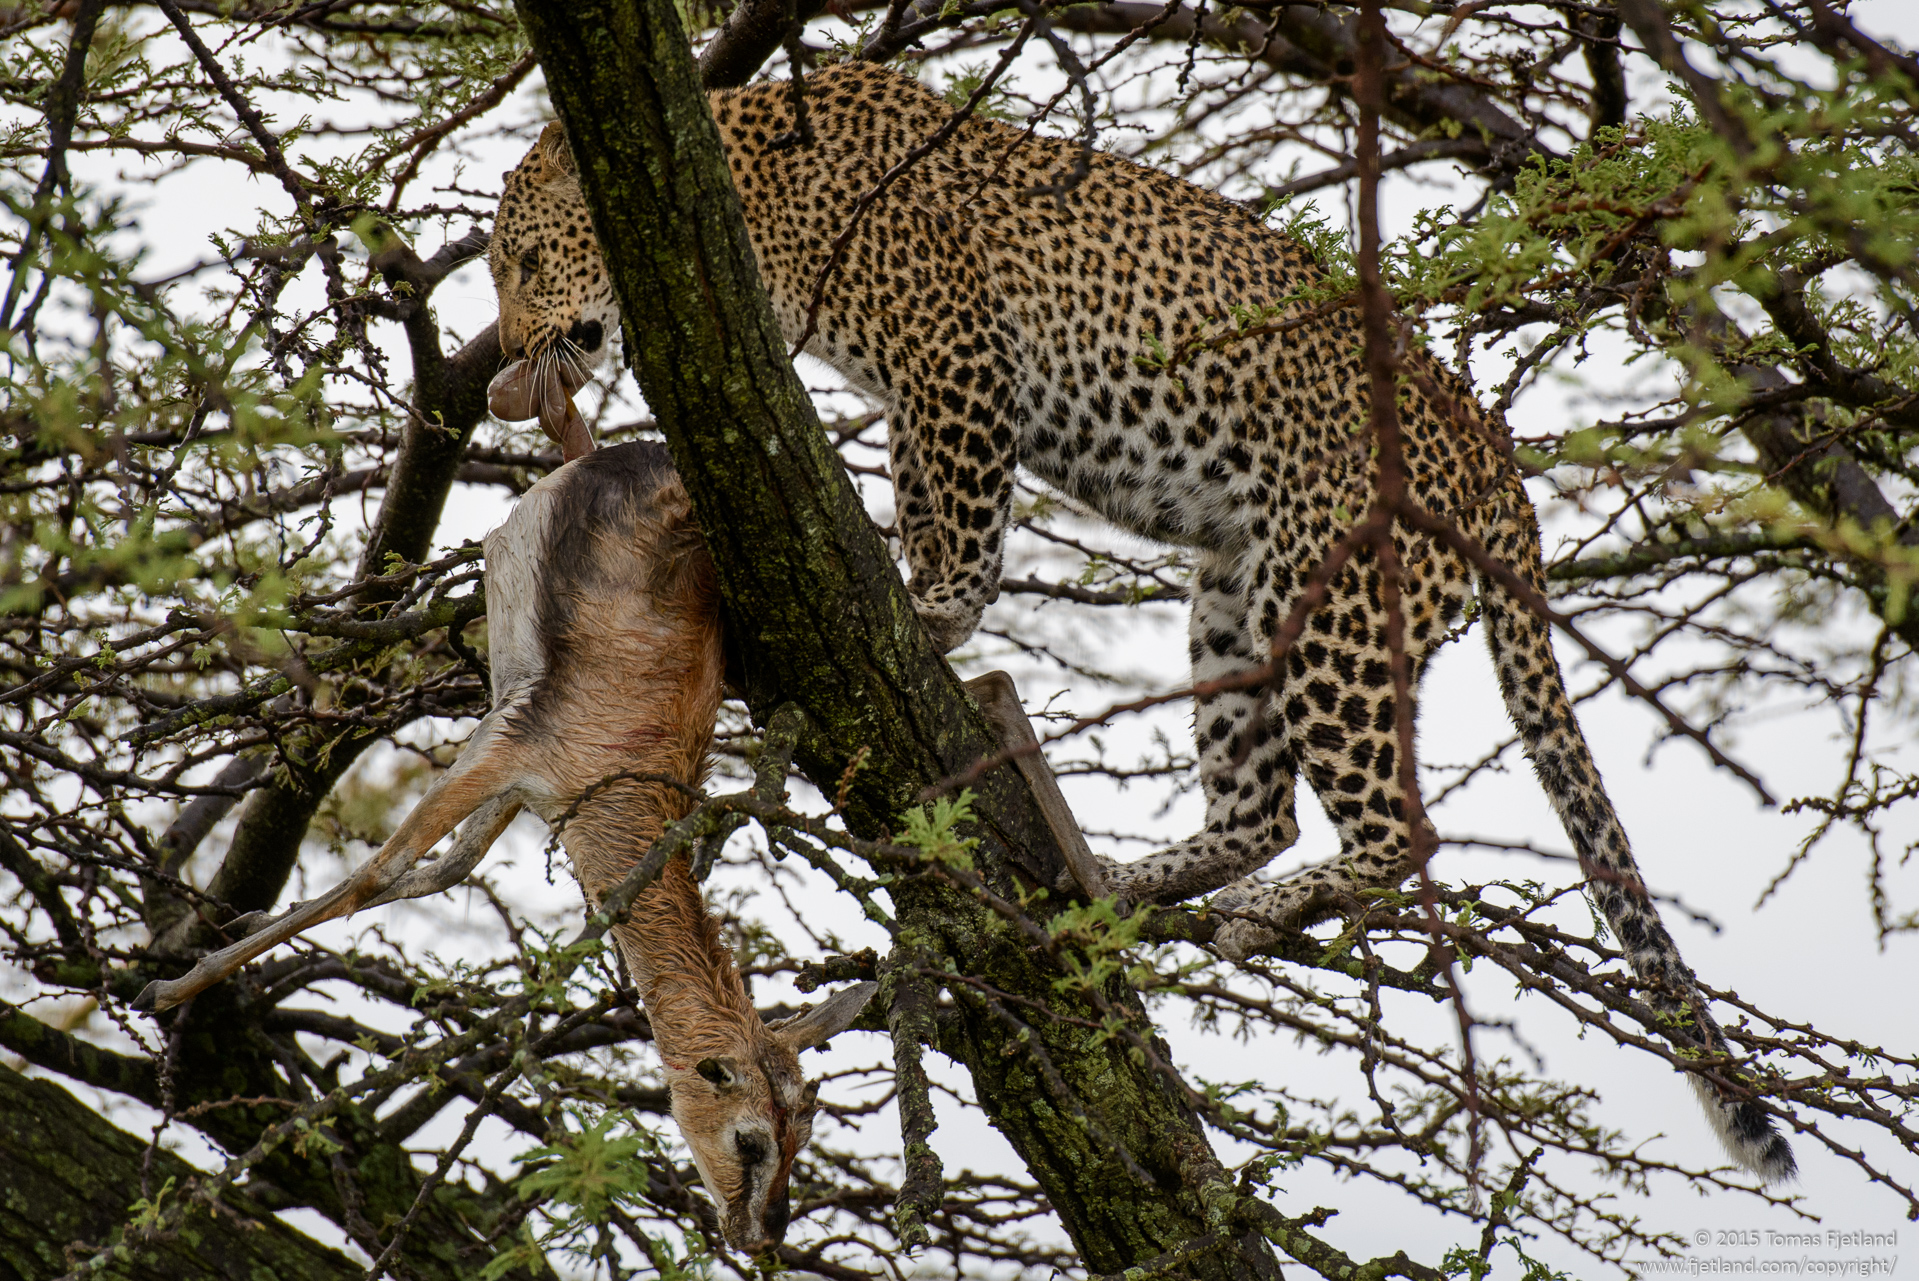 The resident leopard in Olare Orok conservancy, Fig.